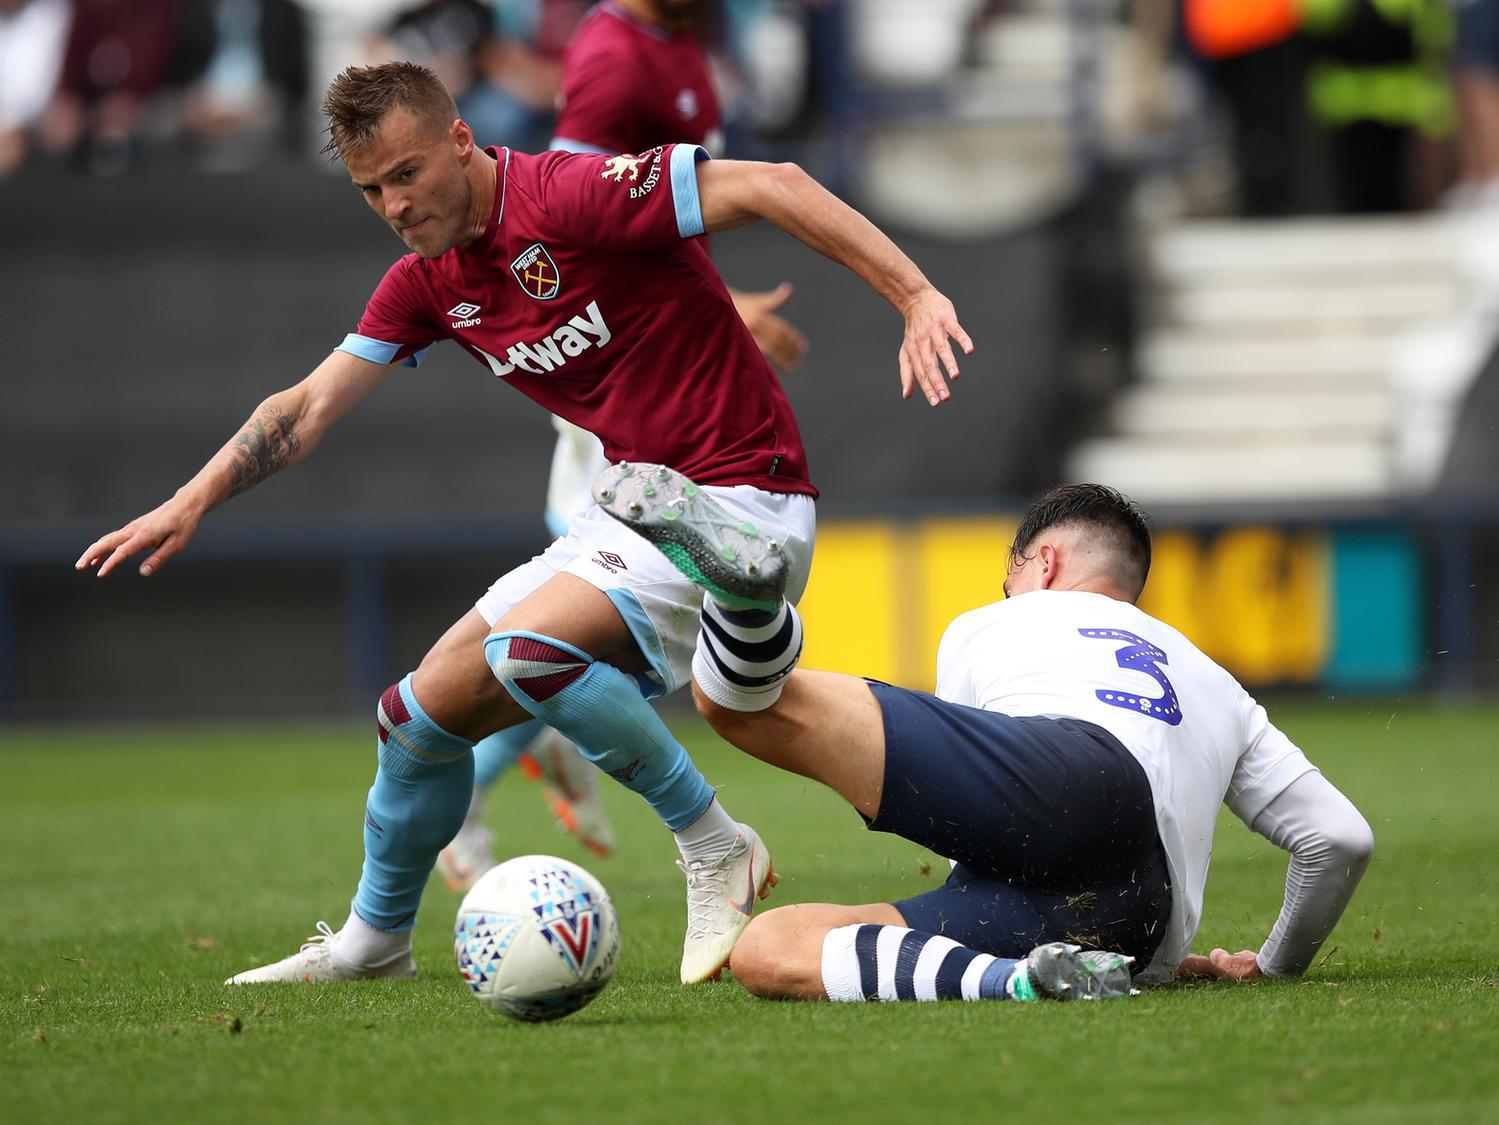 Fleetwood Town may look to bring in Preston North End defender Josh Earl in on loan this month, with his club eager for him to get first team football this season. (Football Insider)